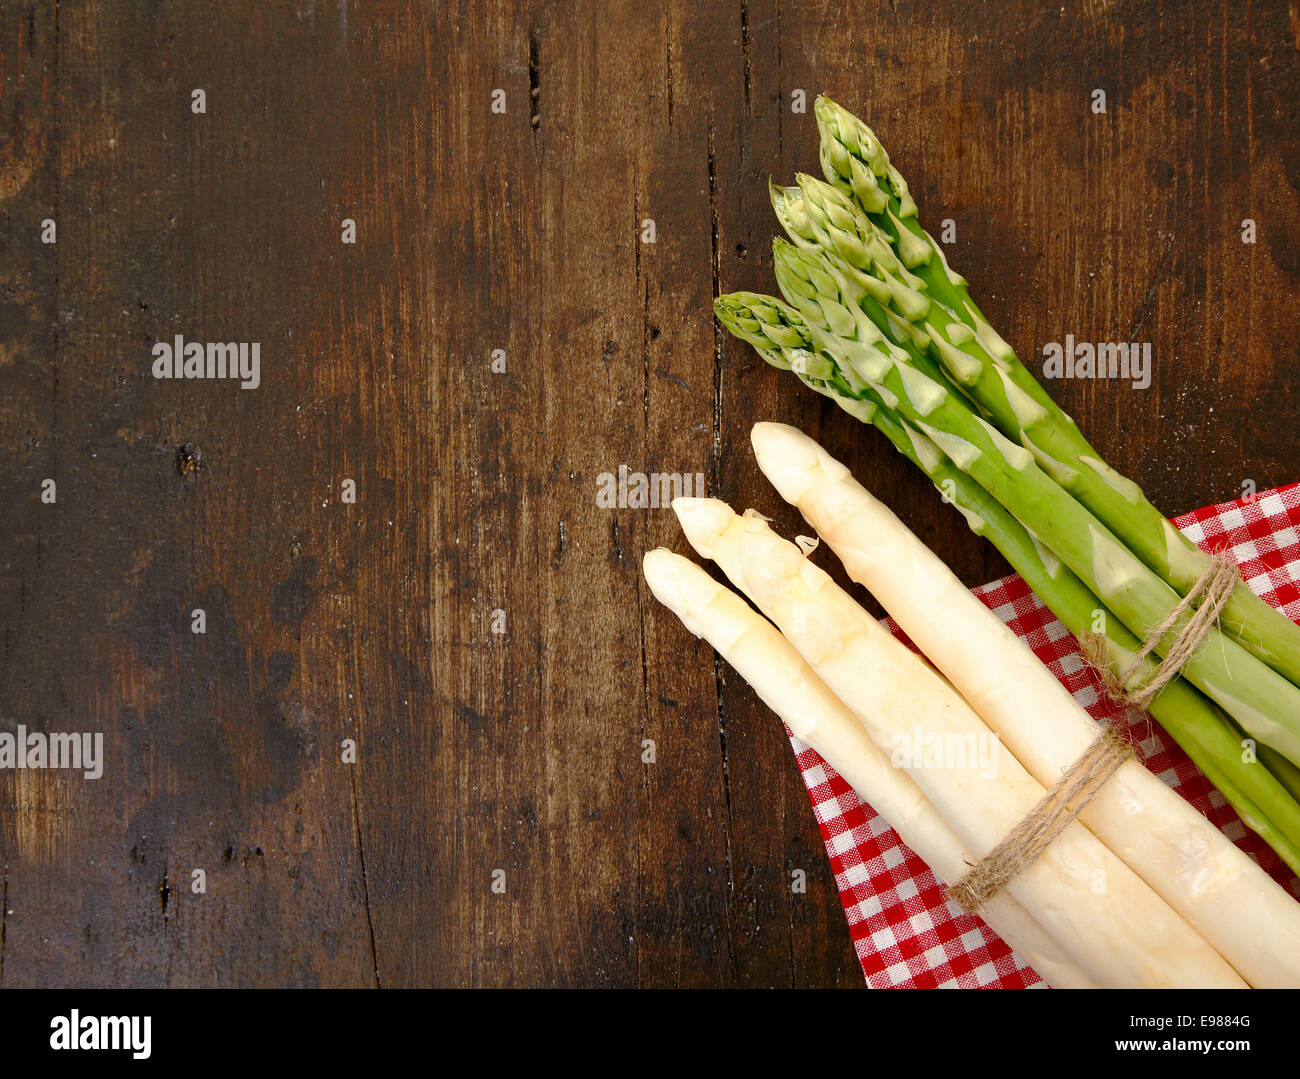 Fresh bunches of green and white asparagus lying on a checked napkin on a textured wooden surface with copyspace Stock Photo